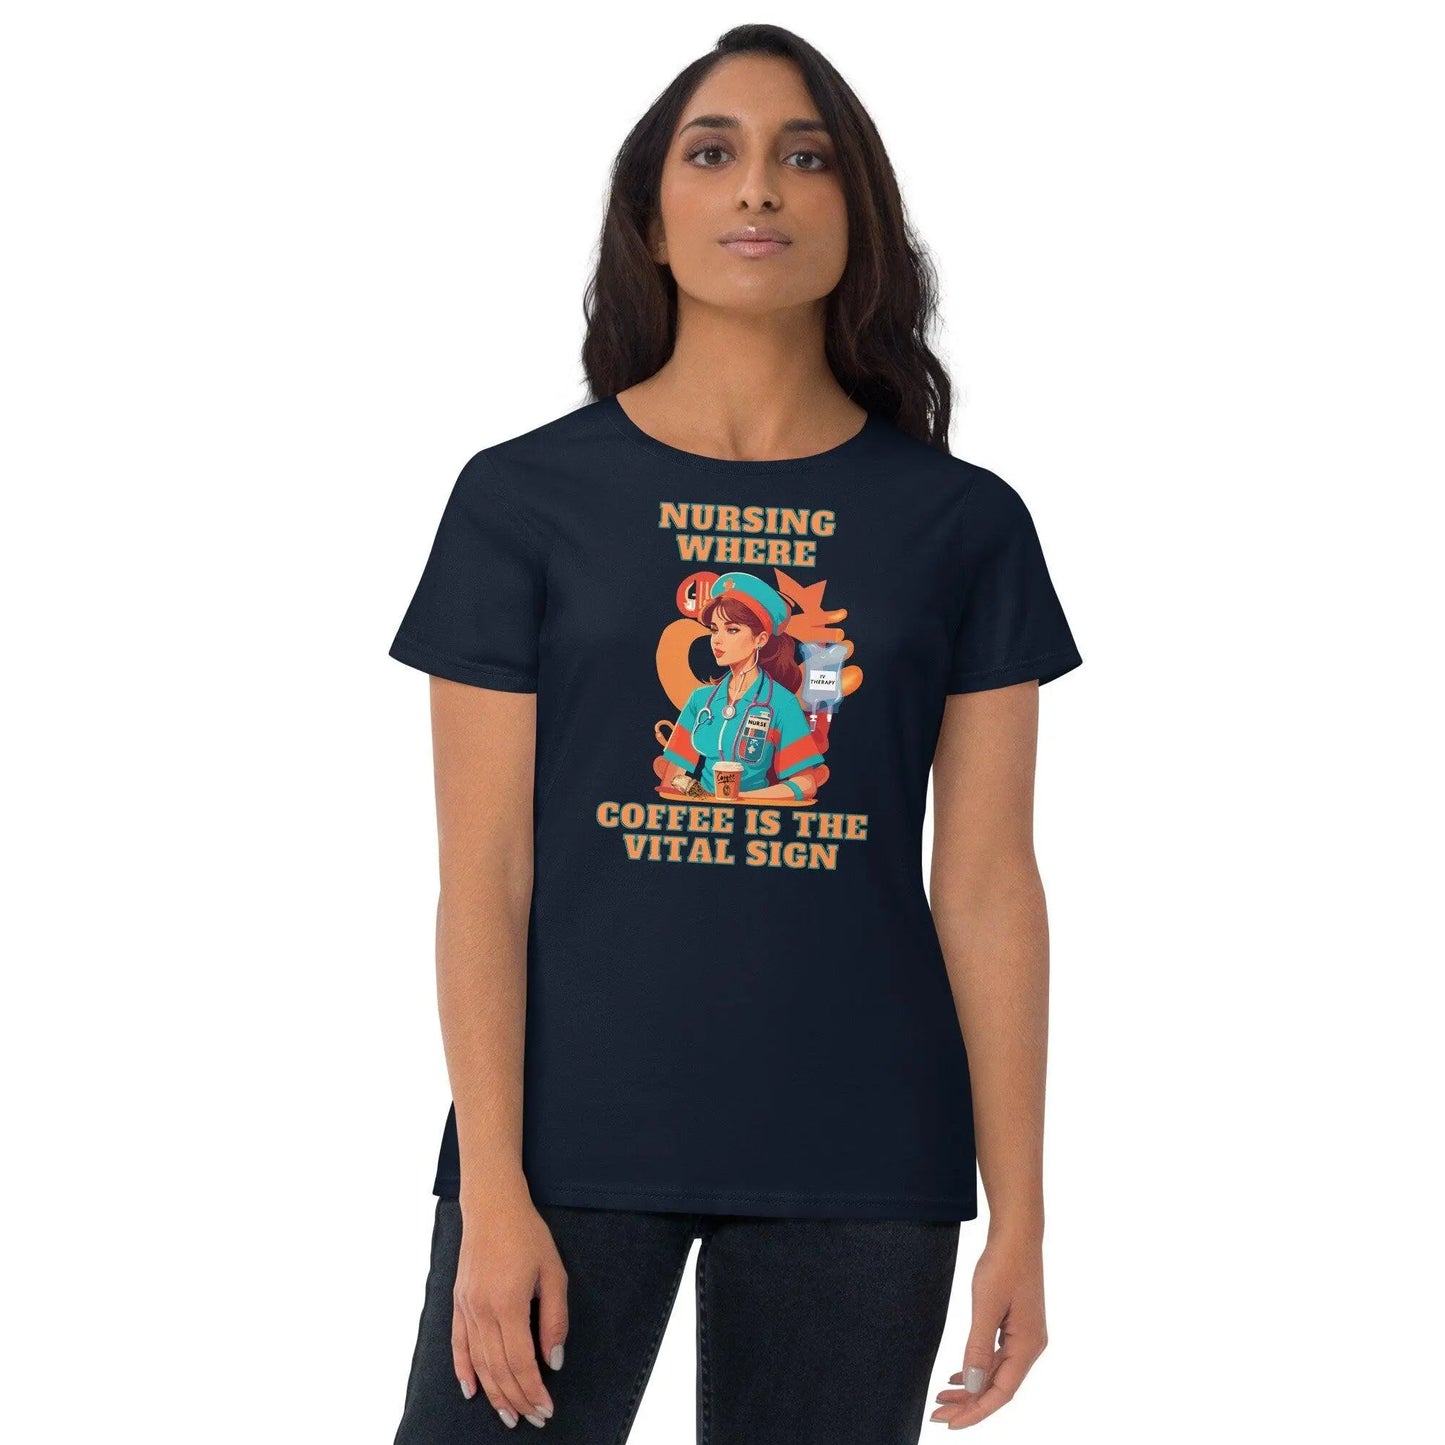 Boho Nurse Vibes Nursing Where Coffee is the Vital Sign Neuro, Oncology Nurse Apparel for Healthcare Heroes. Top-selling design!